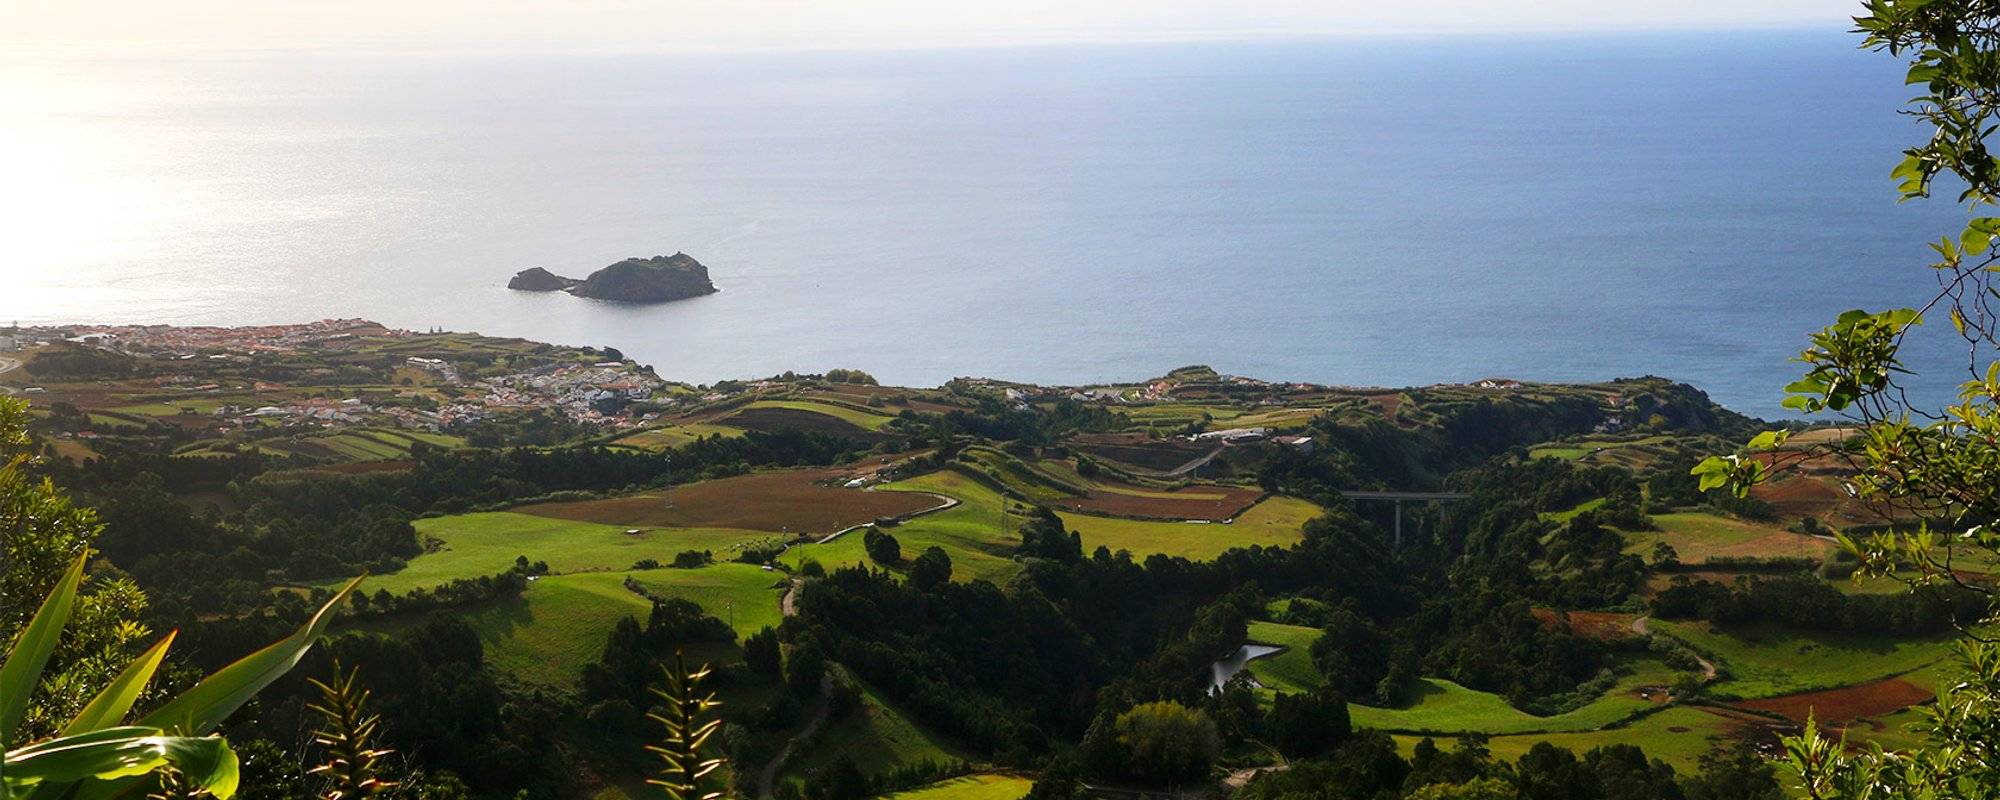 Visit the Azores #17: The fight for a beautiful picture - hiking to Lagoa do Fogo (EN/GER/FR)